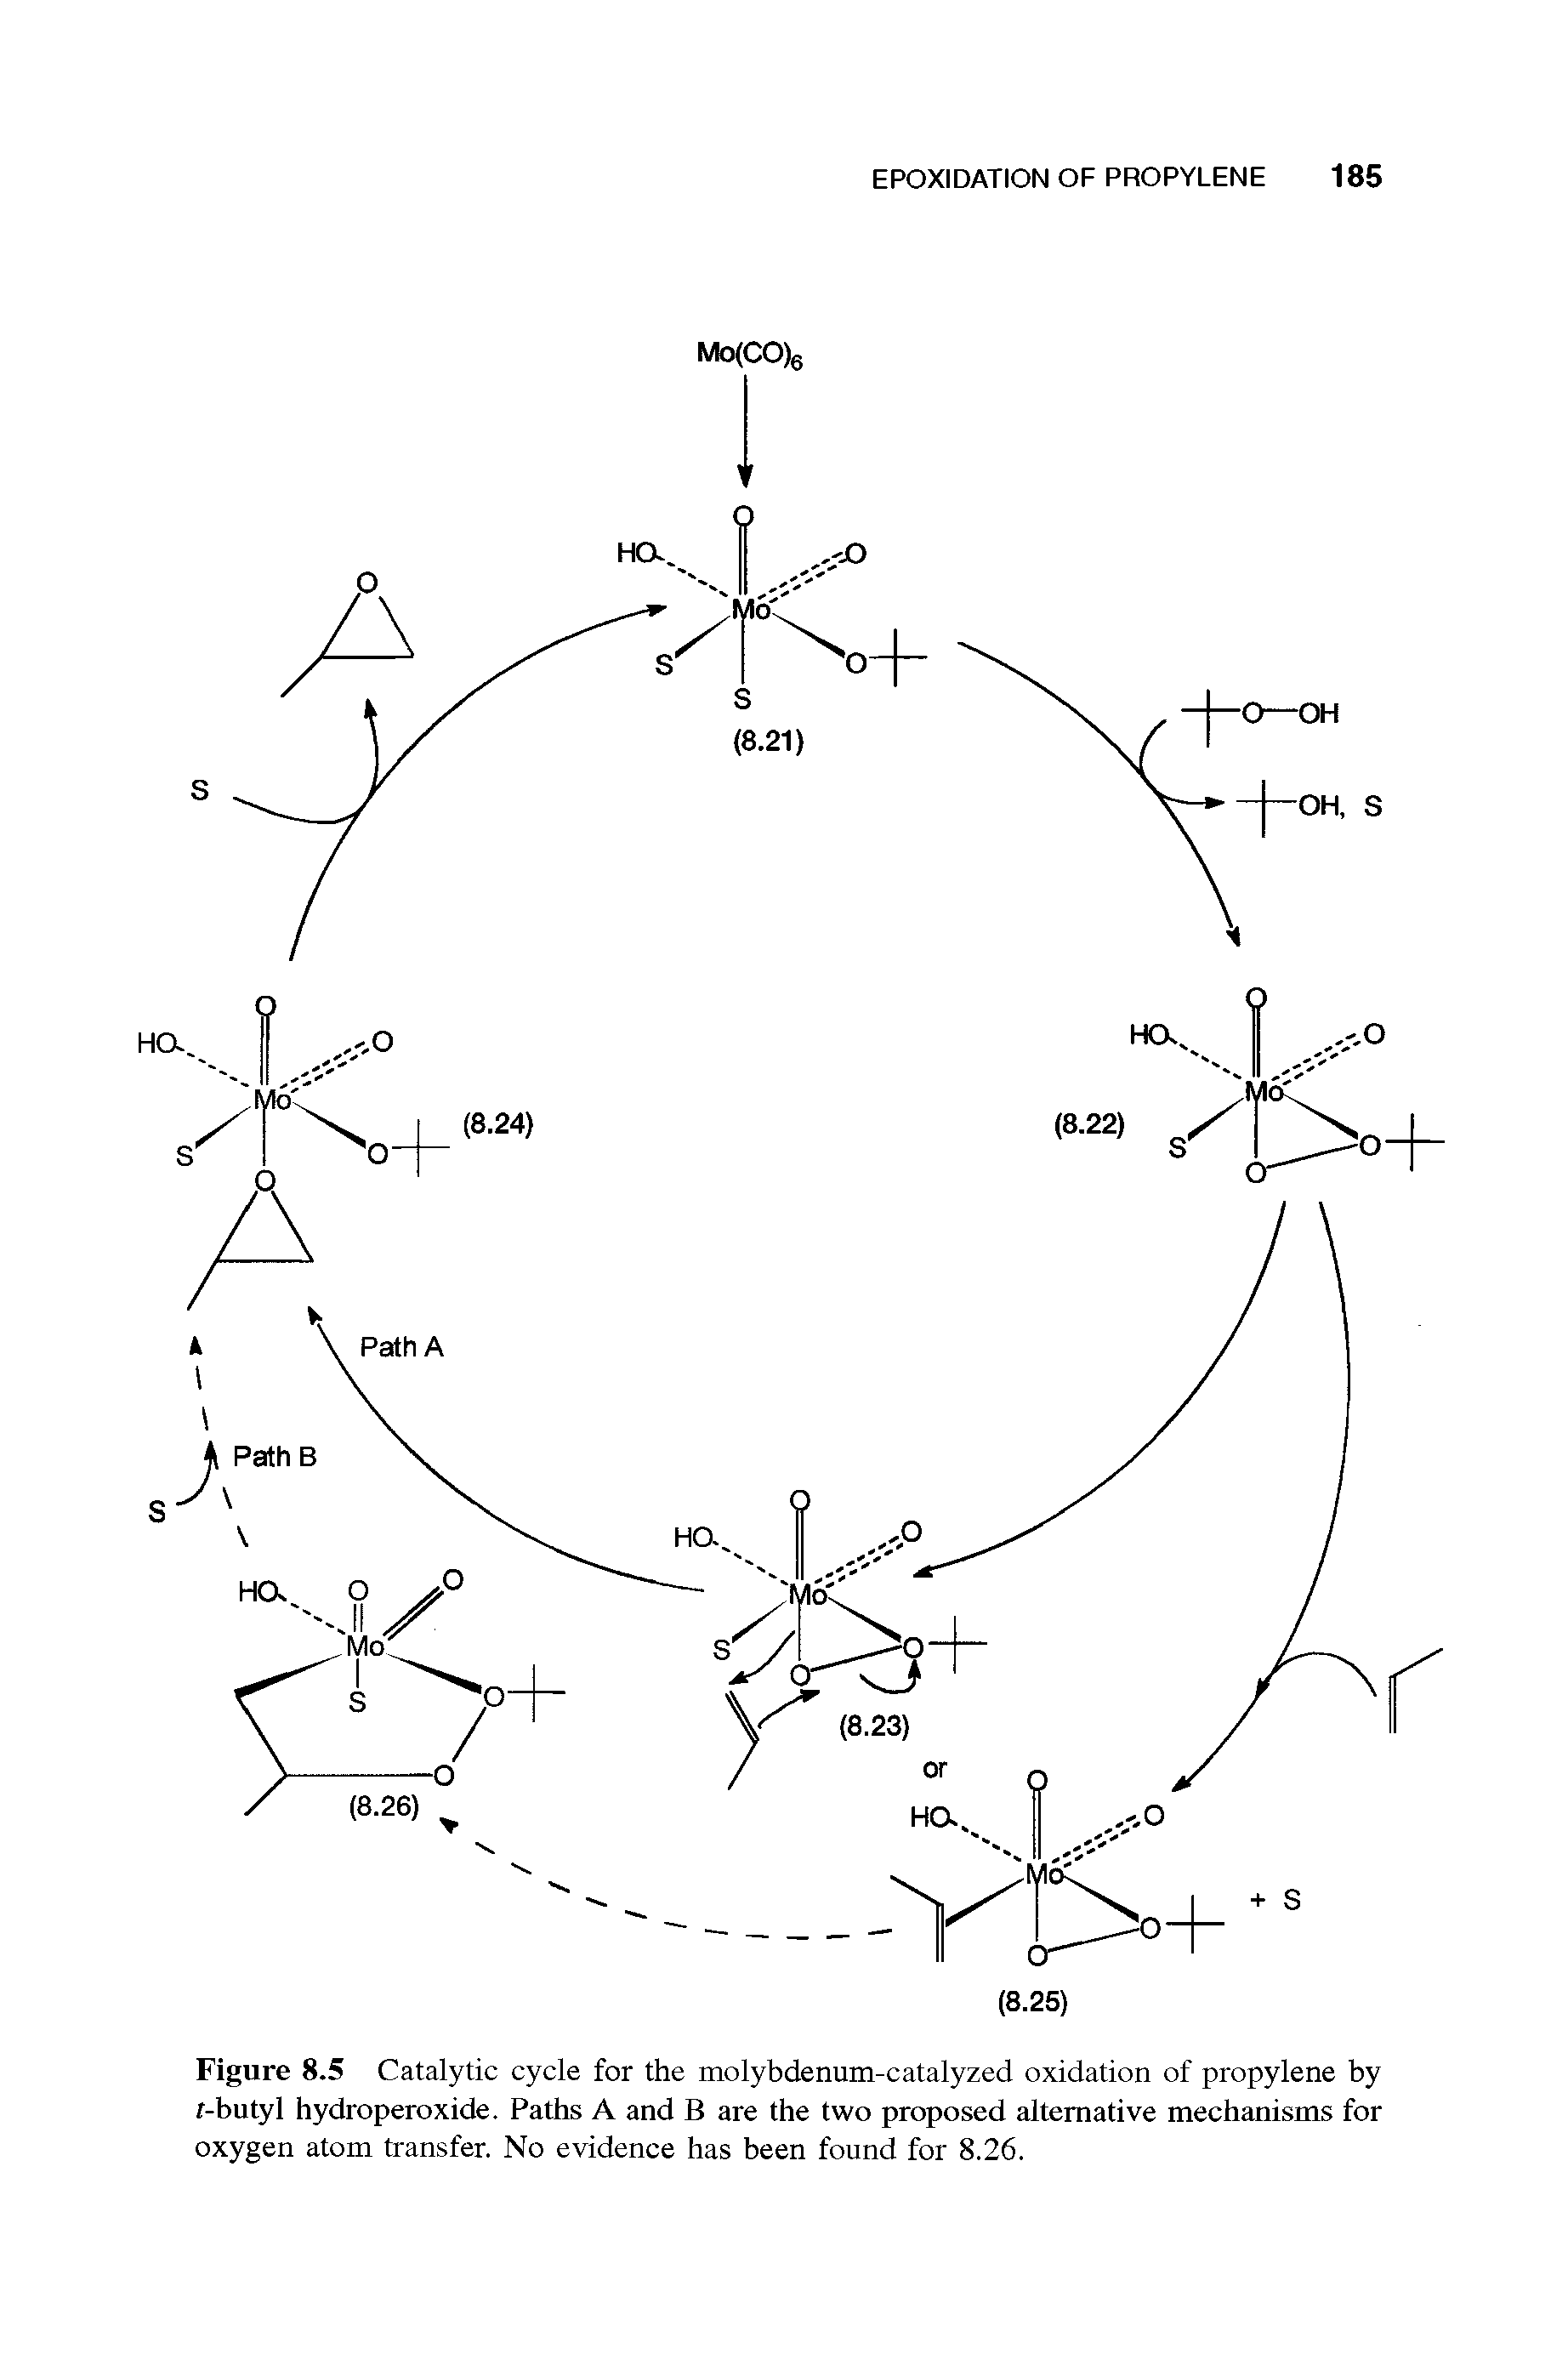 Figure 8.5 Catalytic cycle for the molybdenum-catalyzed oxidation of propylene by r-butyl hydroperoxide. Paths A and B are the two proposed alternative mechanisms for oxygen atom transfer. No evidence has been found for 8.26.